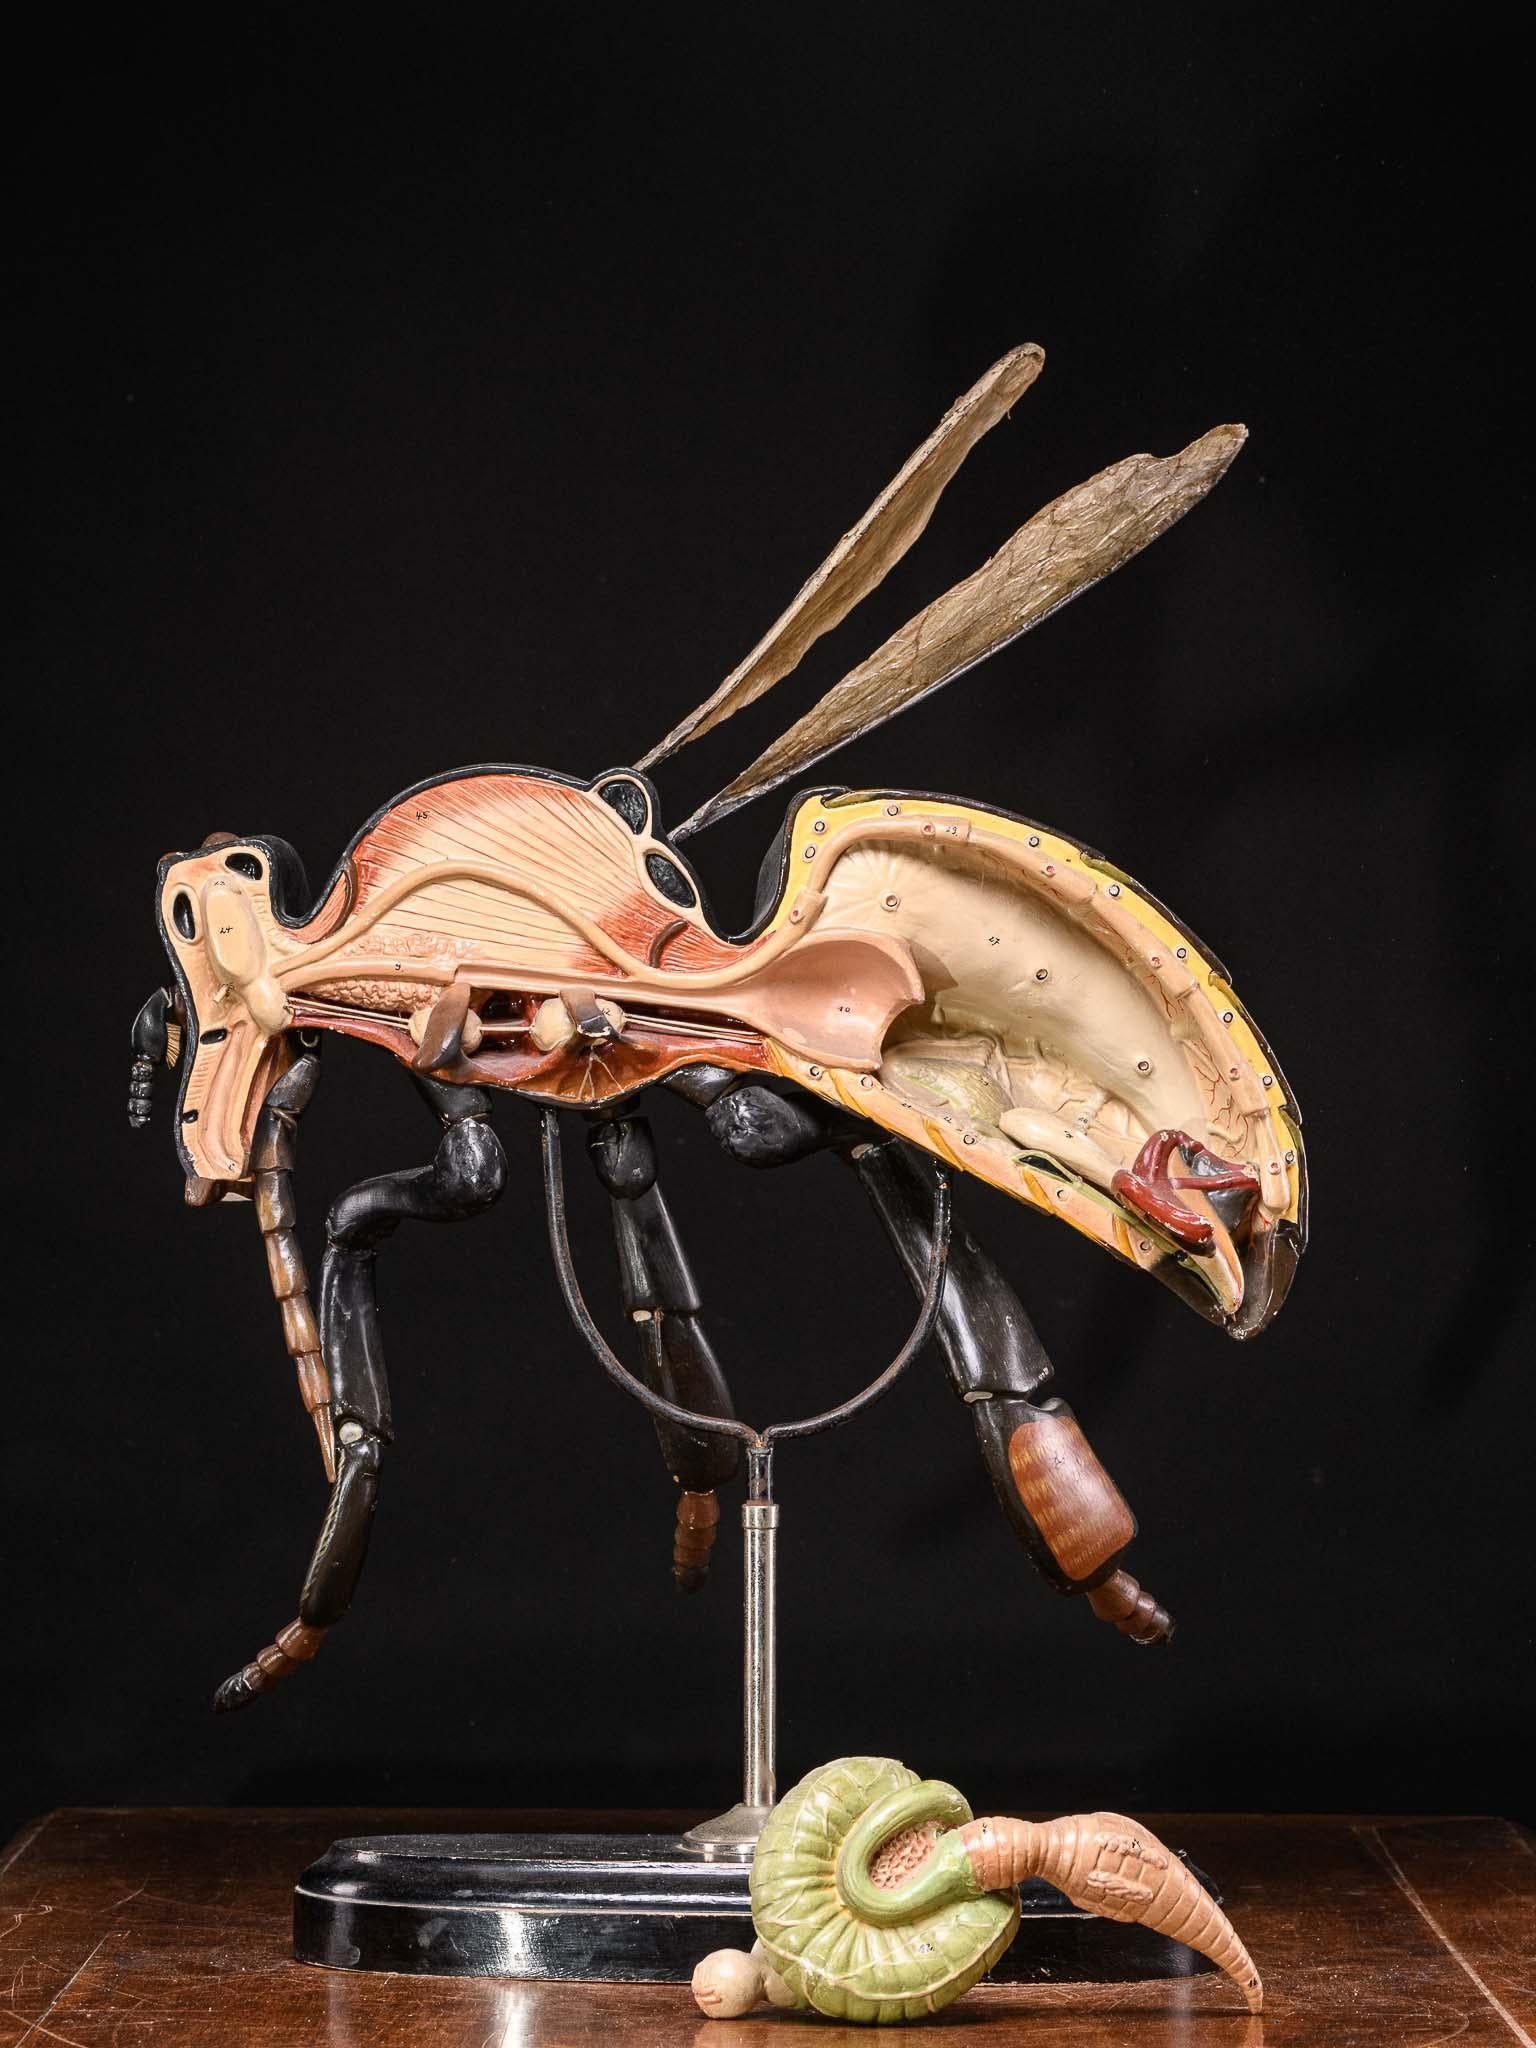 Plaster Large Didactical Model of a Bee labeled “ Denoyer-Geppert Company of Chicago 